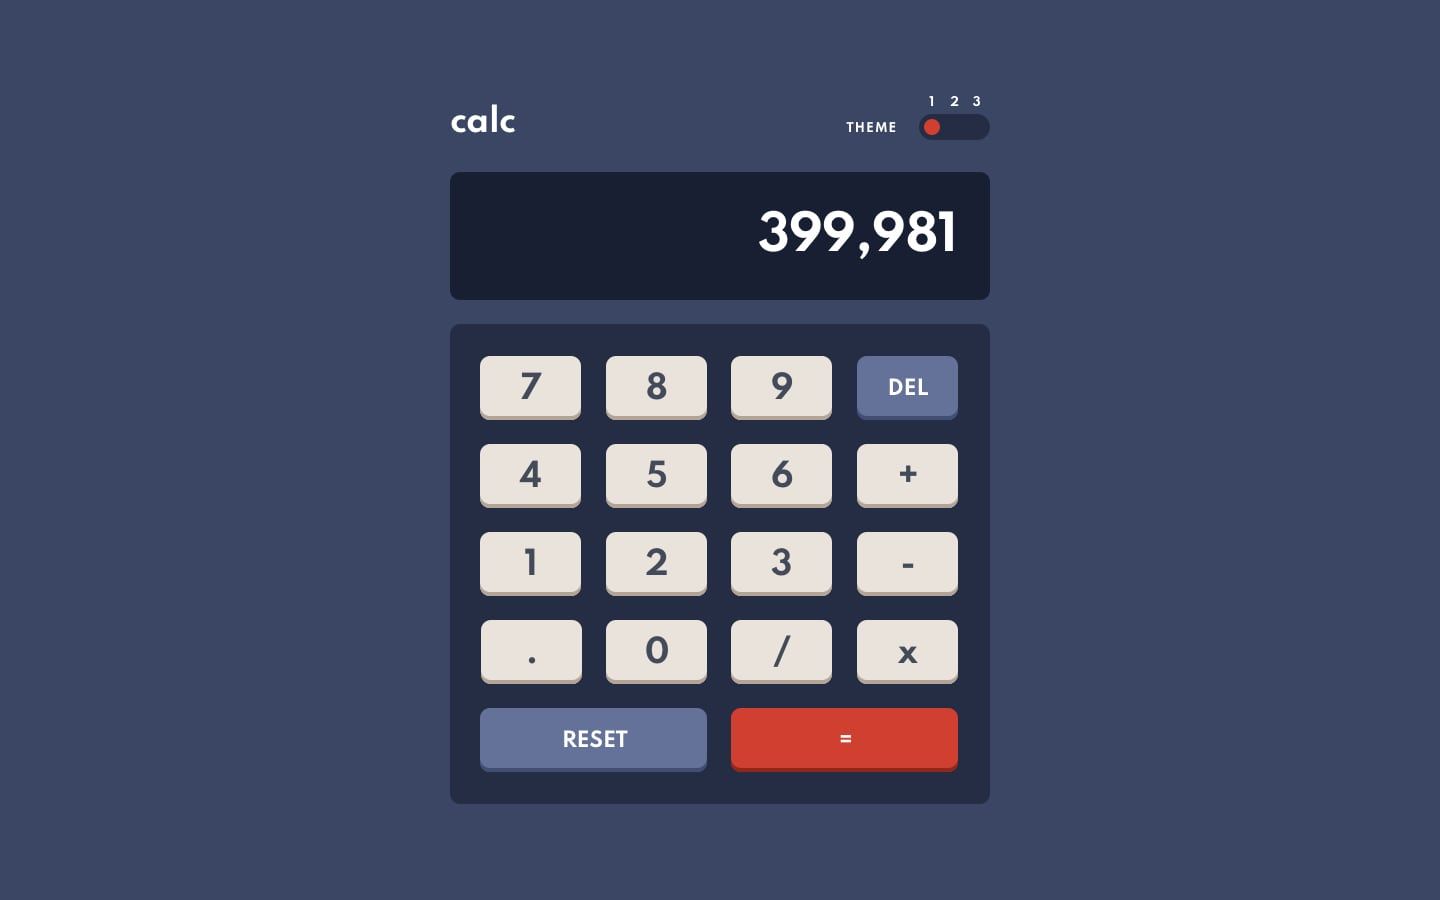 The calculator design featuring a display, a grid of buttons and a theme switch. The buttons are labelled 0 to 9, +, −, ×, /, DEL, RESET and =.